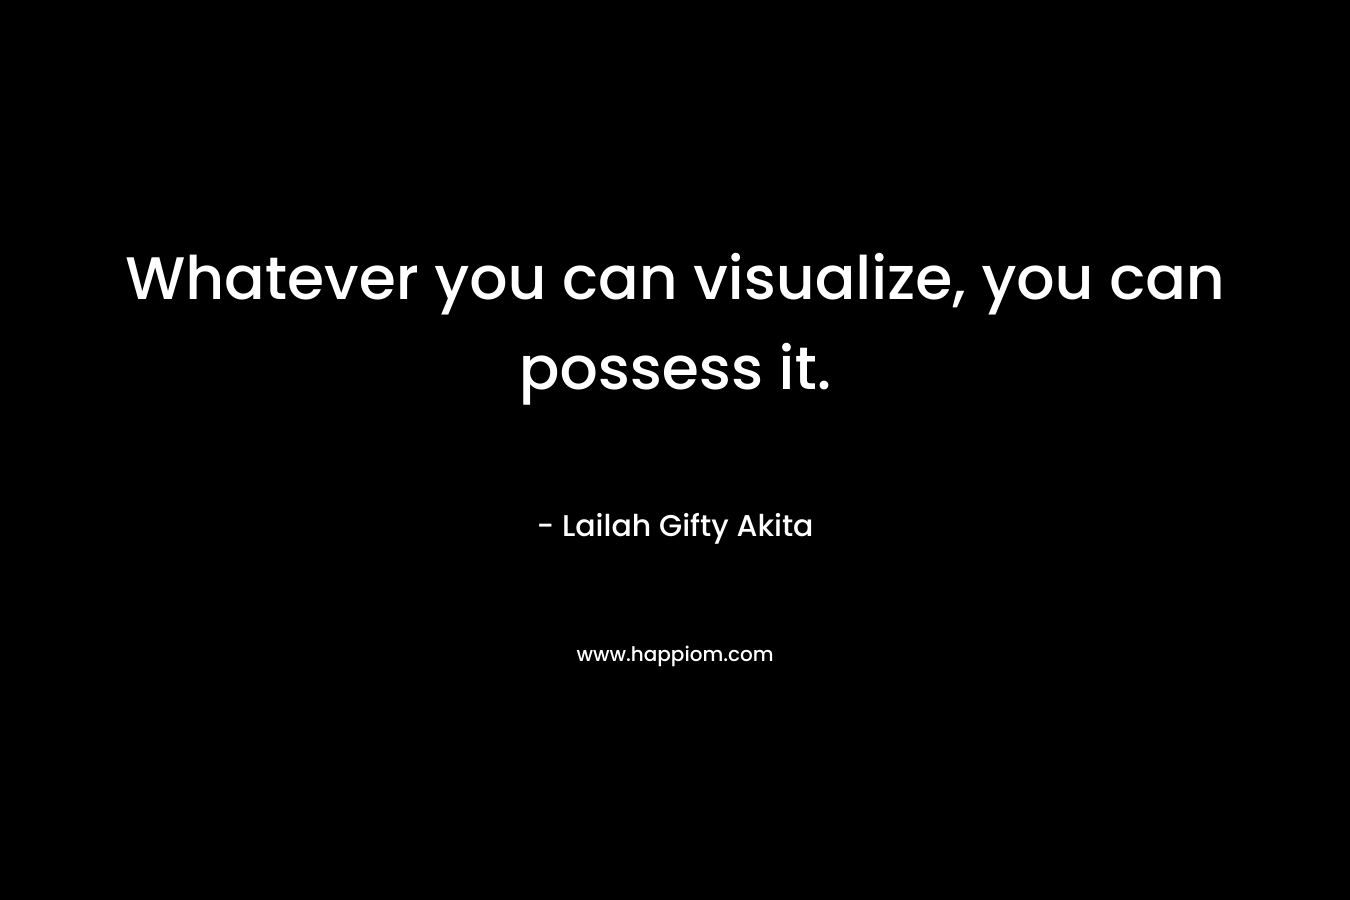 Whatever you can visualize, you can possess it.